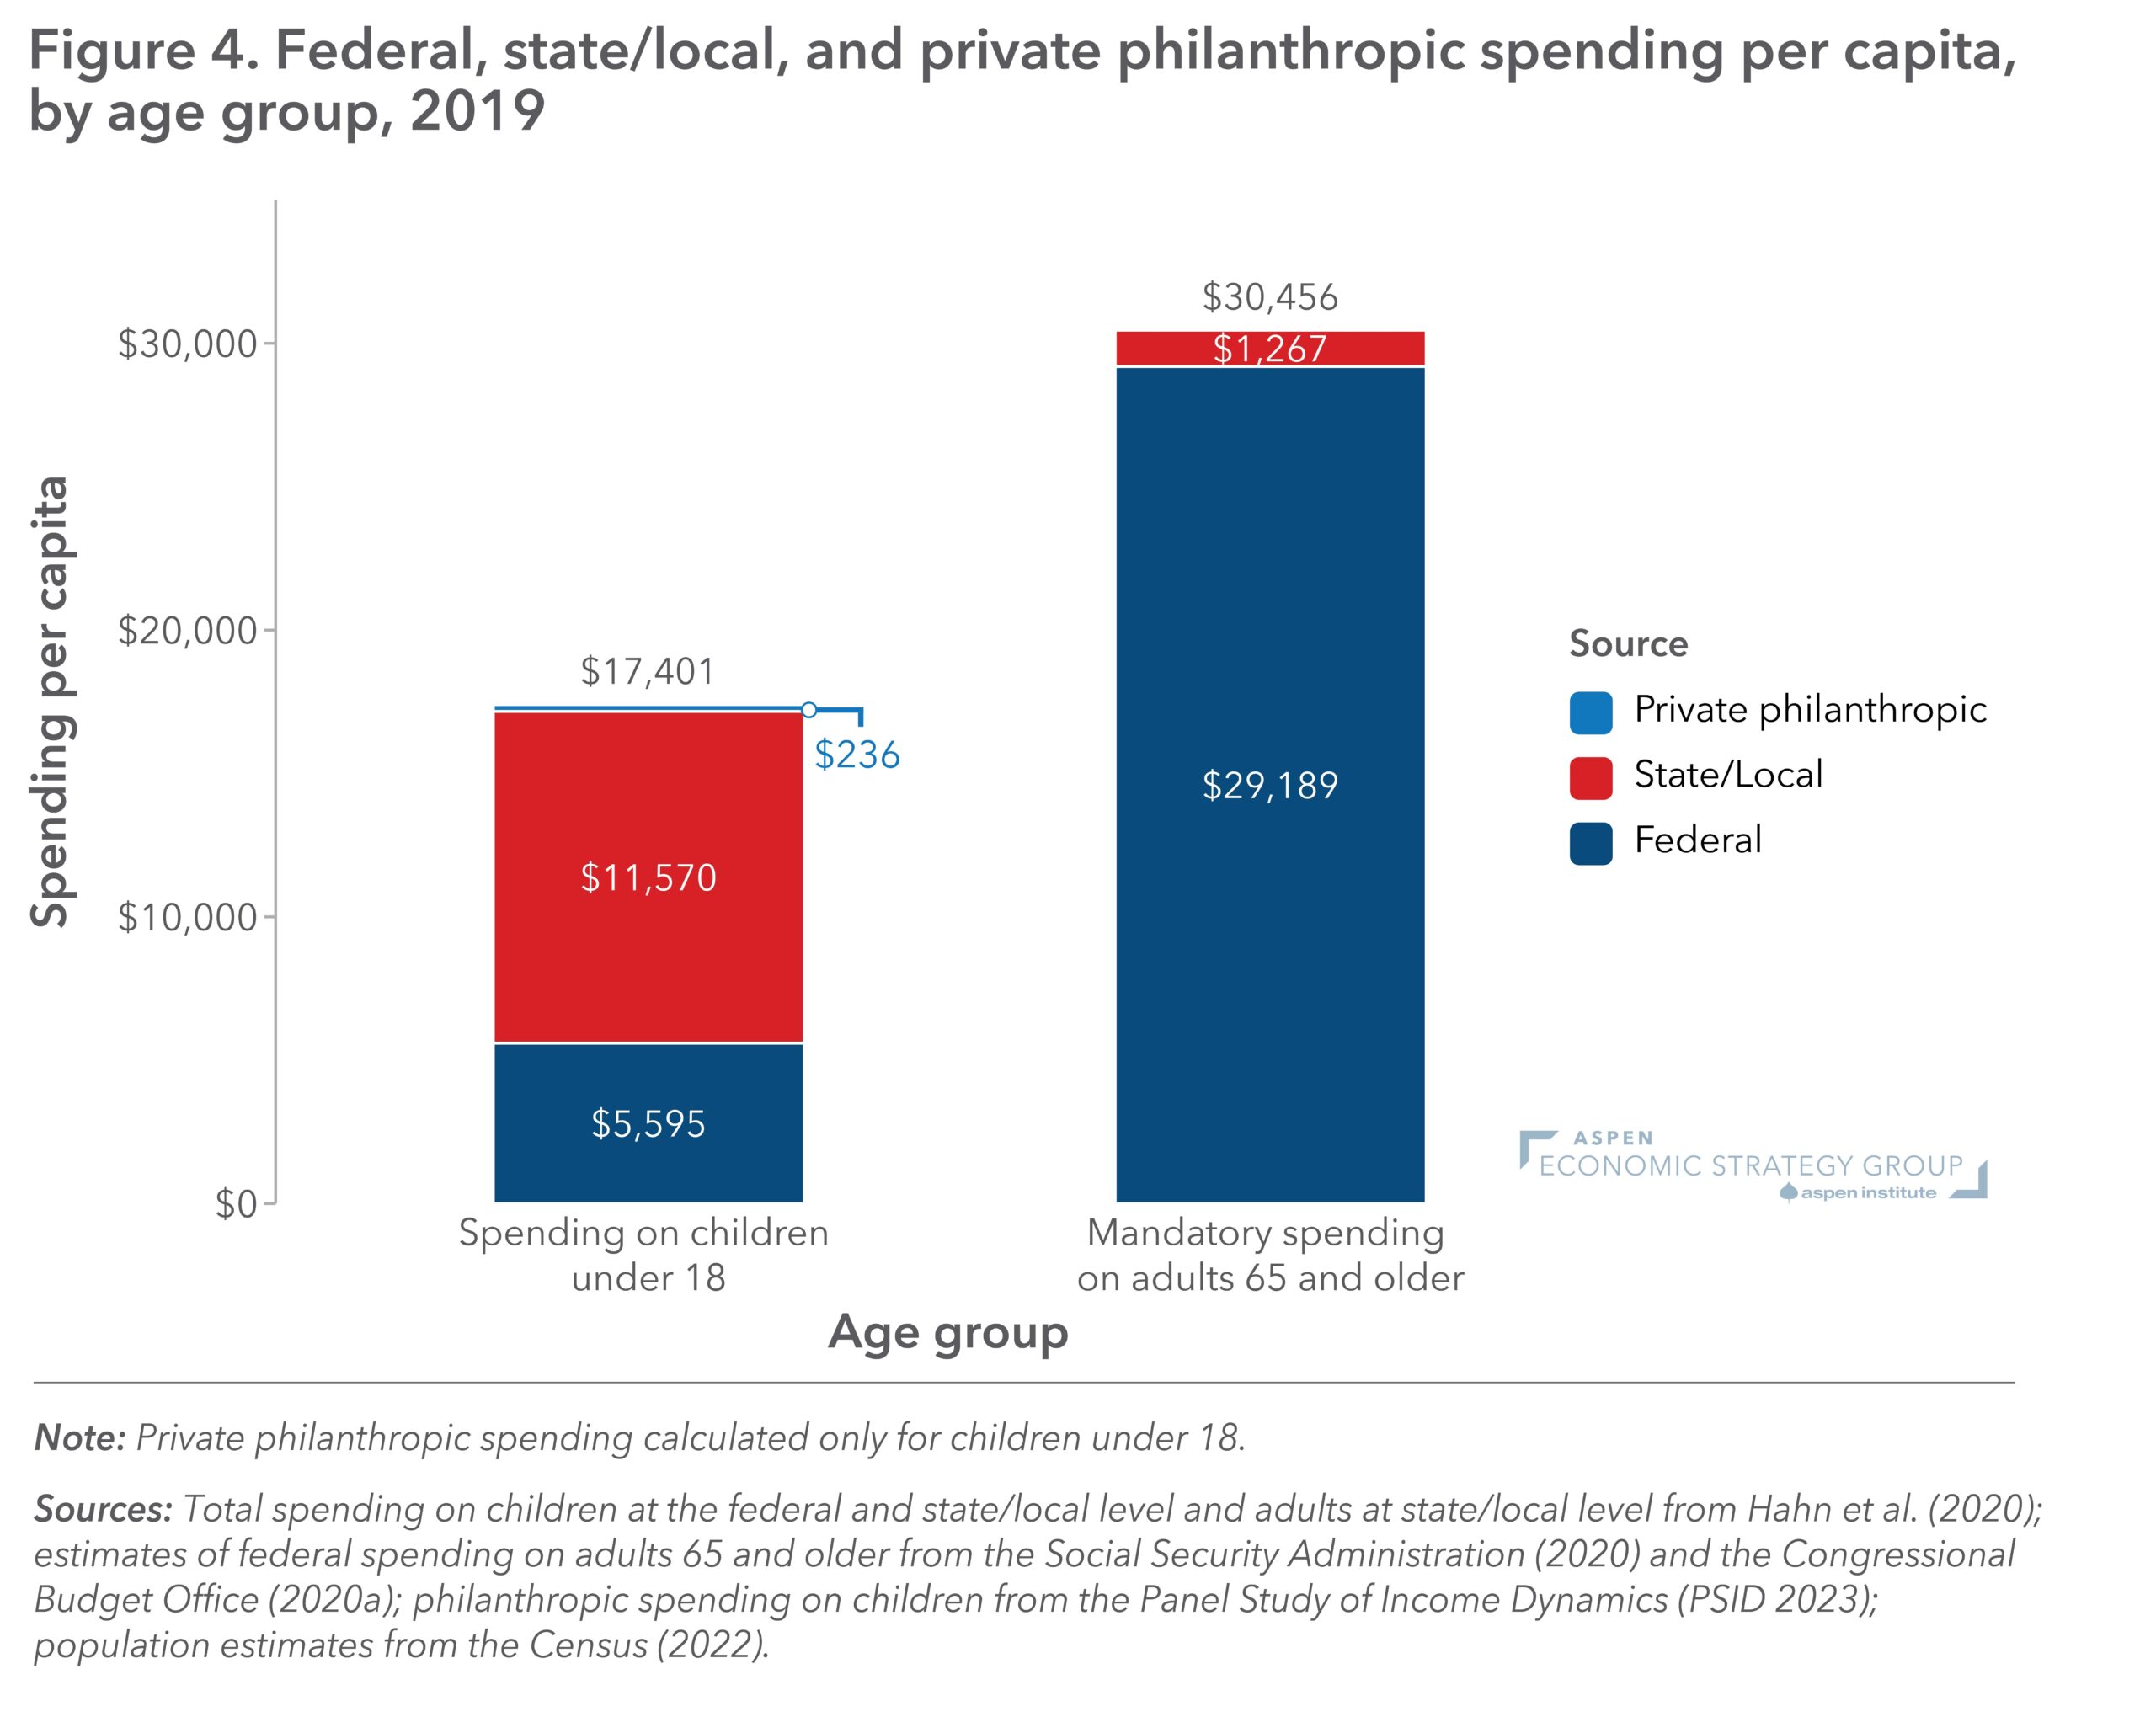 Figure 4: Federal, State/Local, and Private Philanthropic Spending Per Capita, by Age Group, 2019